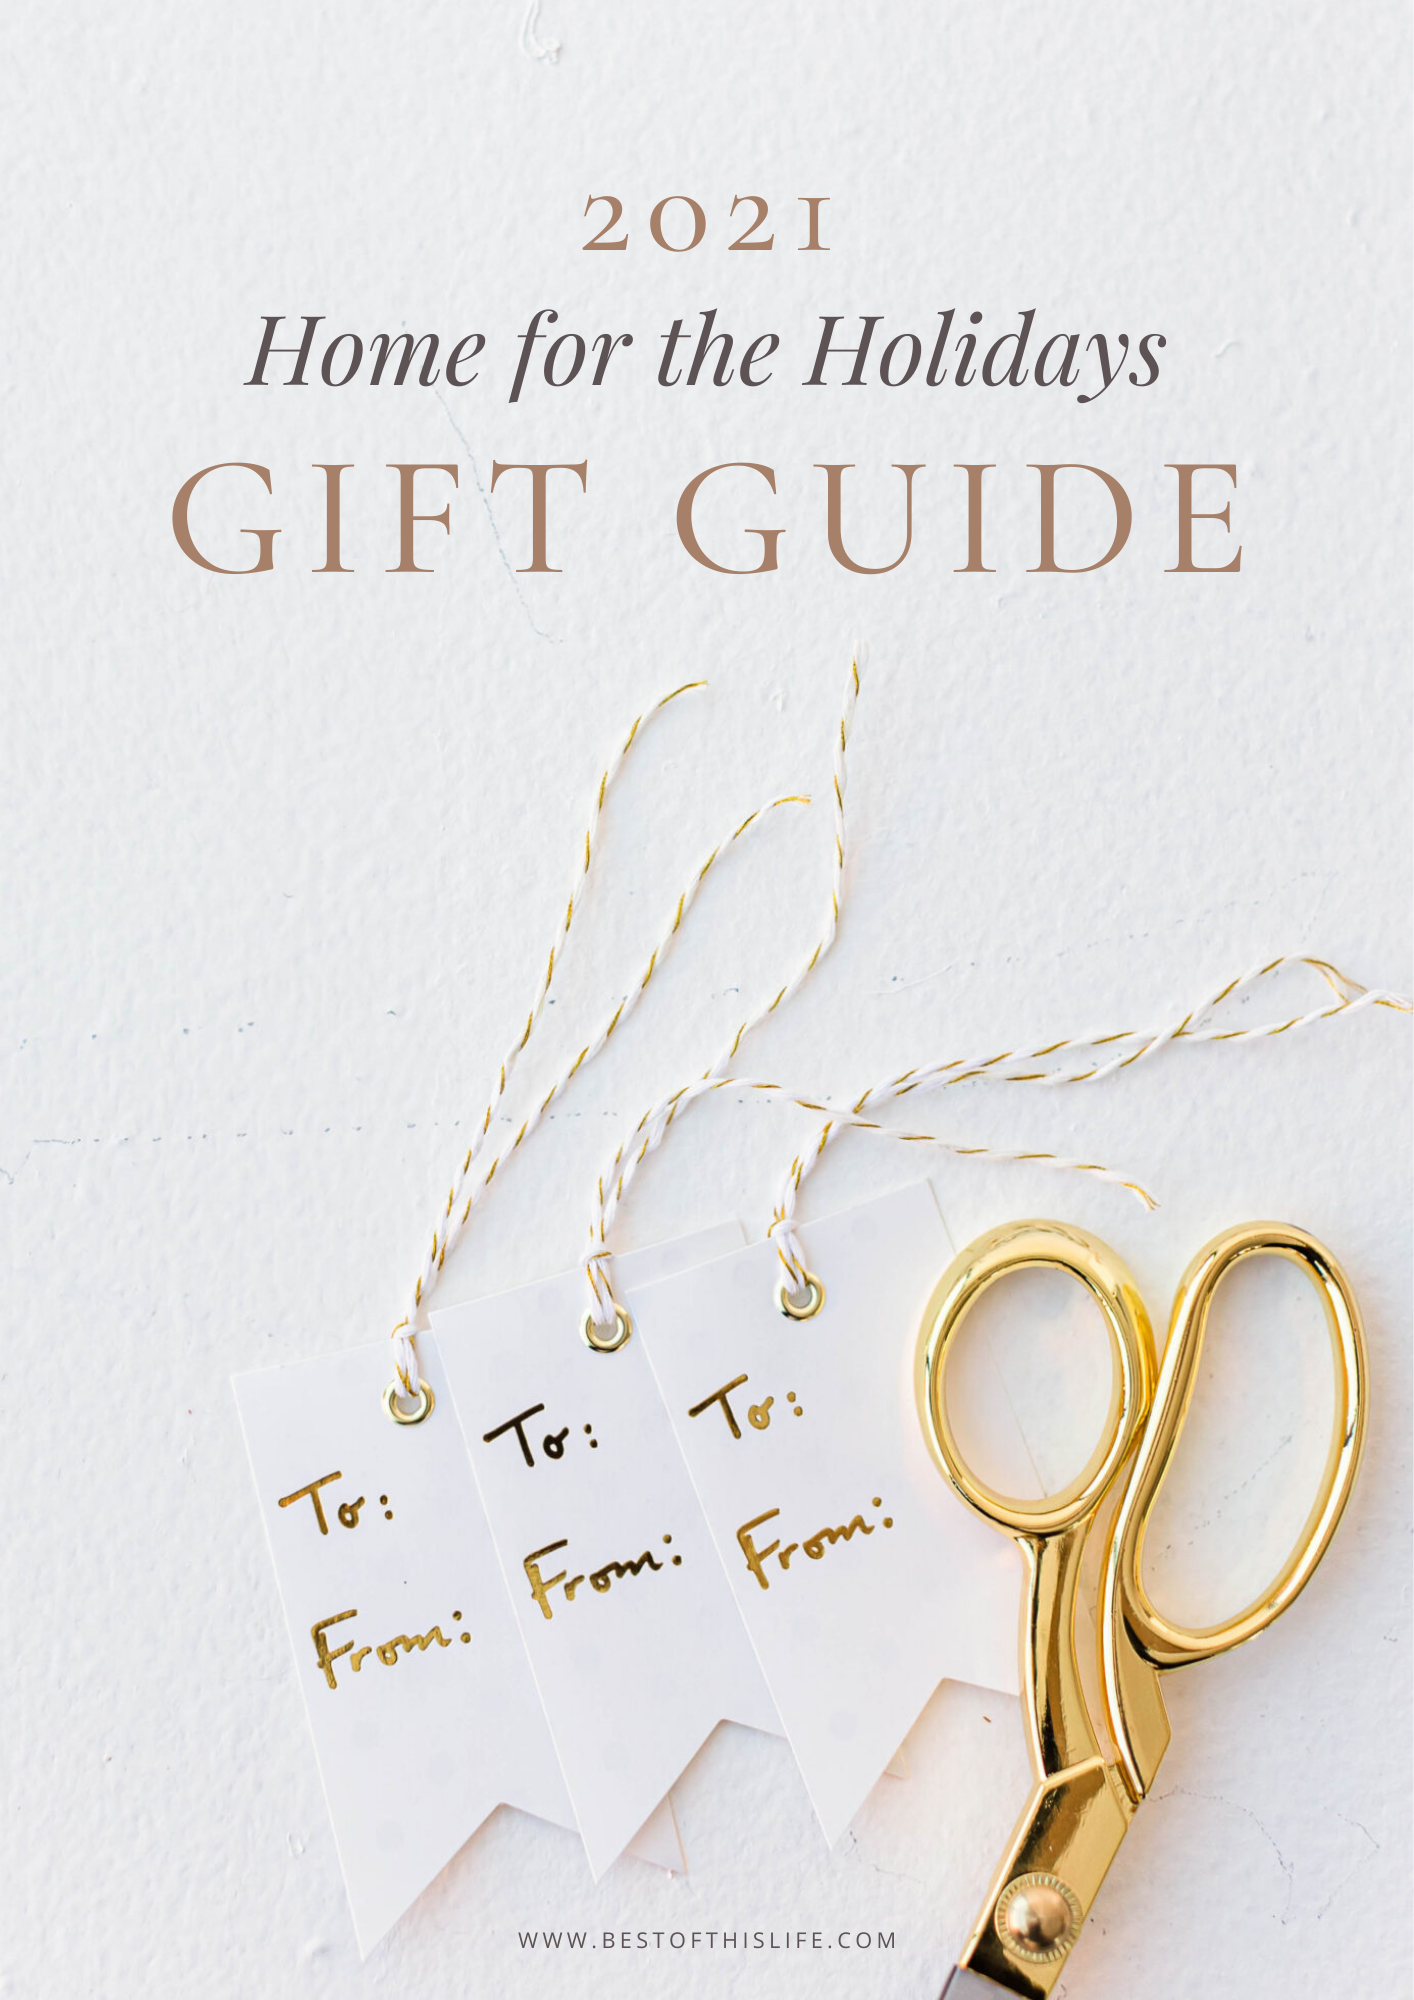 Home for the Holidays: 2021 Gift Guide